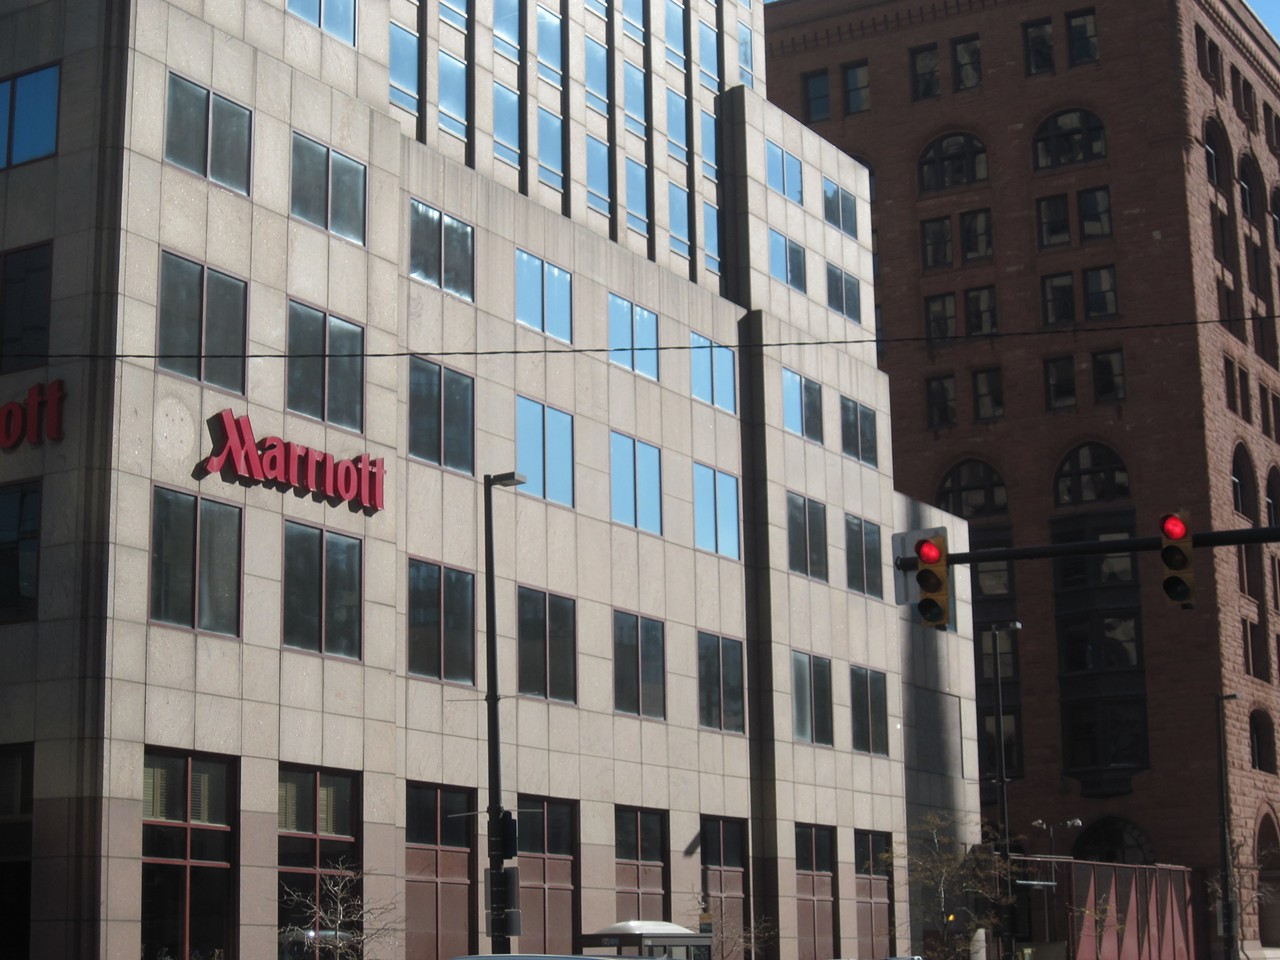 There are privately-owned hotels all over downtown Cleveland, including the Marriott right across the street from the Med Mart.